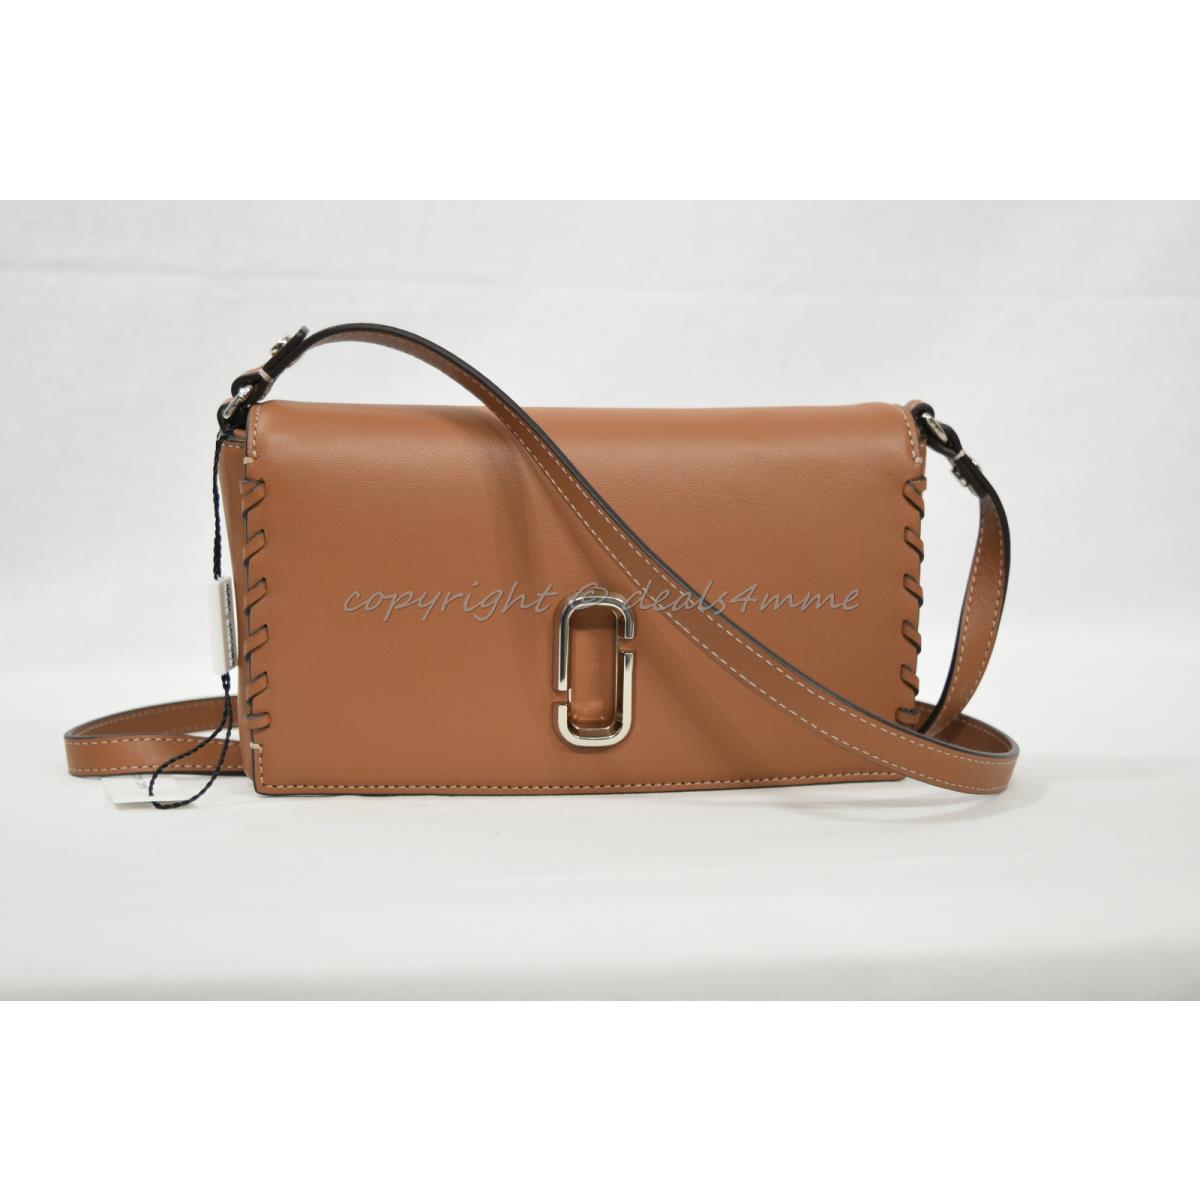 Marc By Marc Jacobs M0010237 Noho Leather Small Shoulder Bag in Caramel Cafe